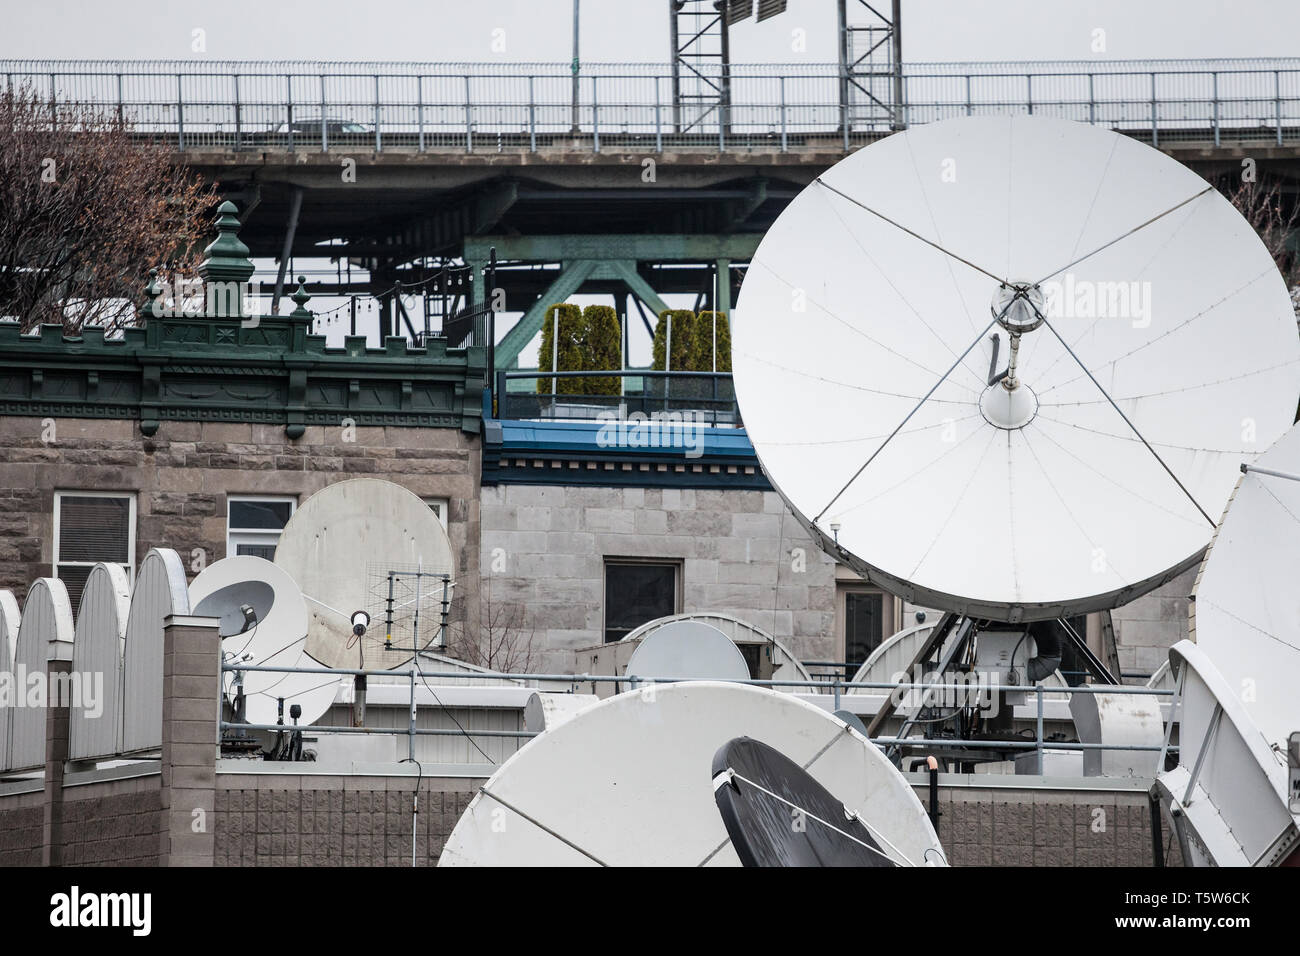 Various satellite dishes and emitters in the technical hub of a media television and radio broadcaster in the suburbs of Montreal, Quebec, Canada  Pic Stock Photo